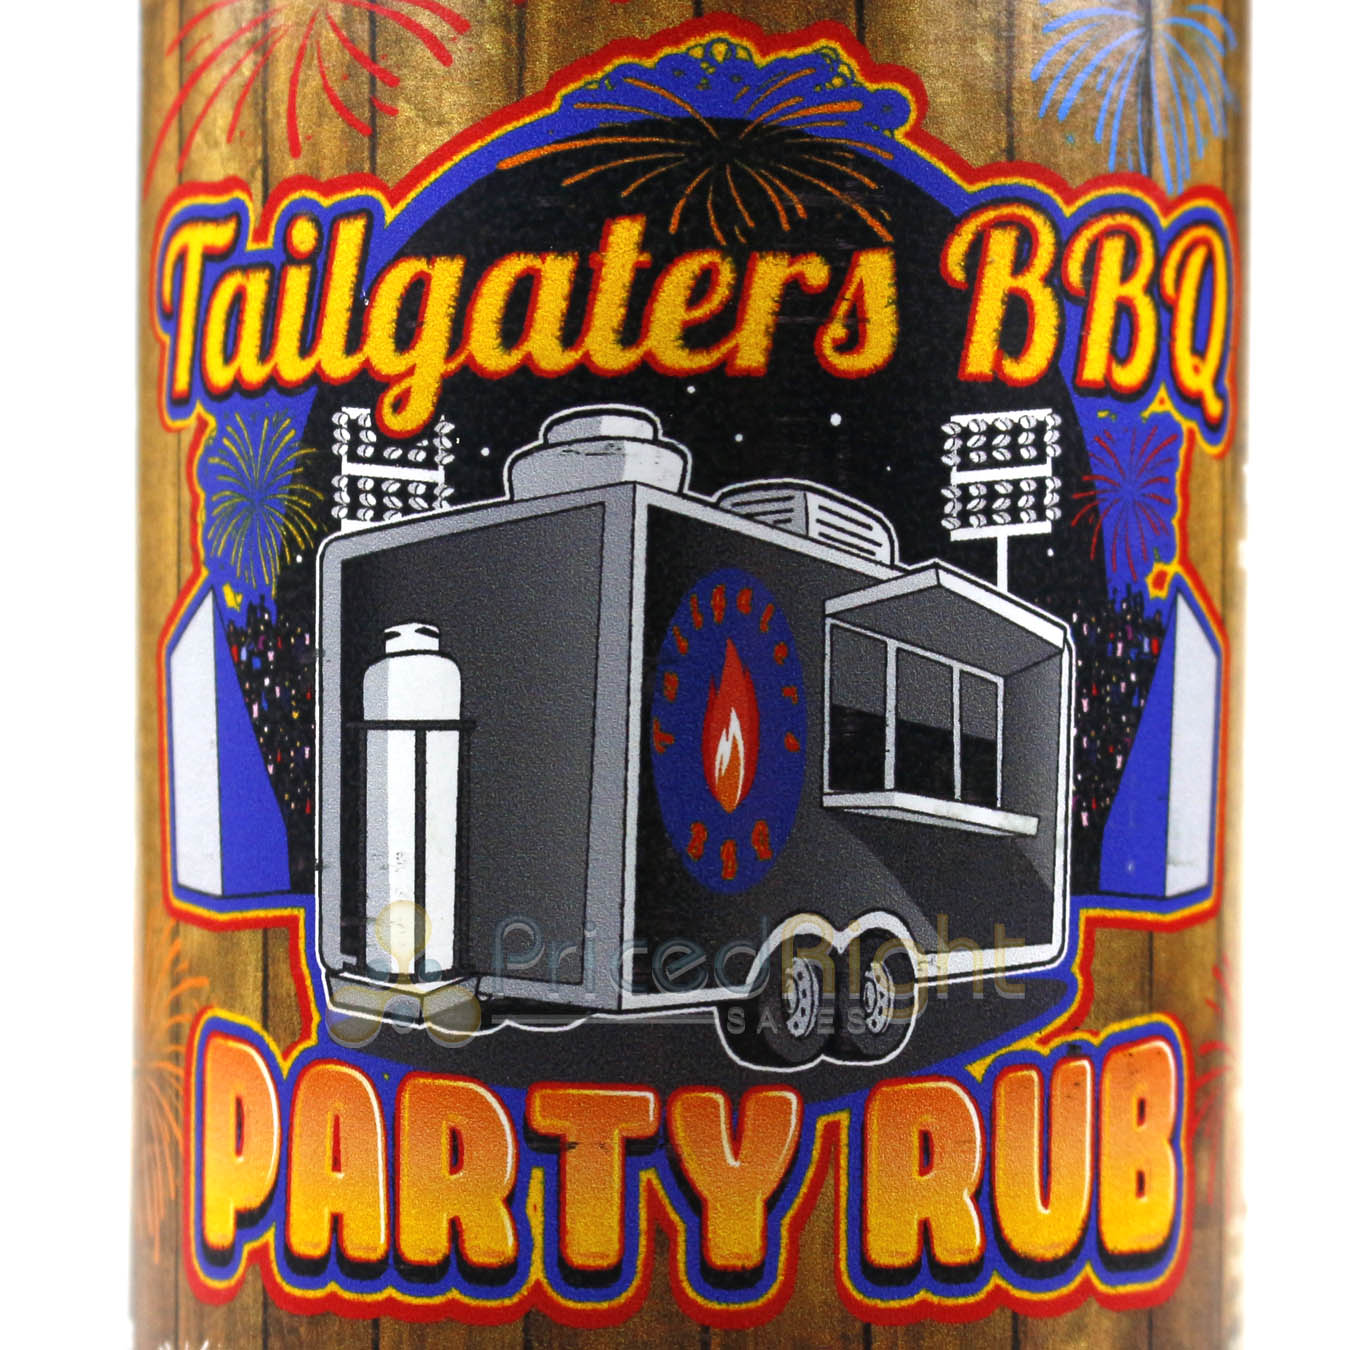 Sucklebusters Tailgaters BBQ Party Seasoning Rub 14 oz Black Pepper Flavor